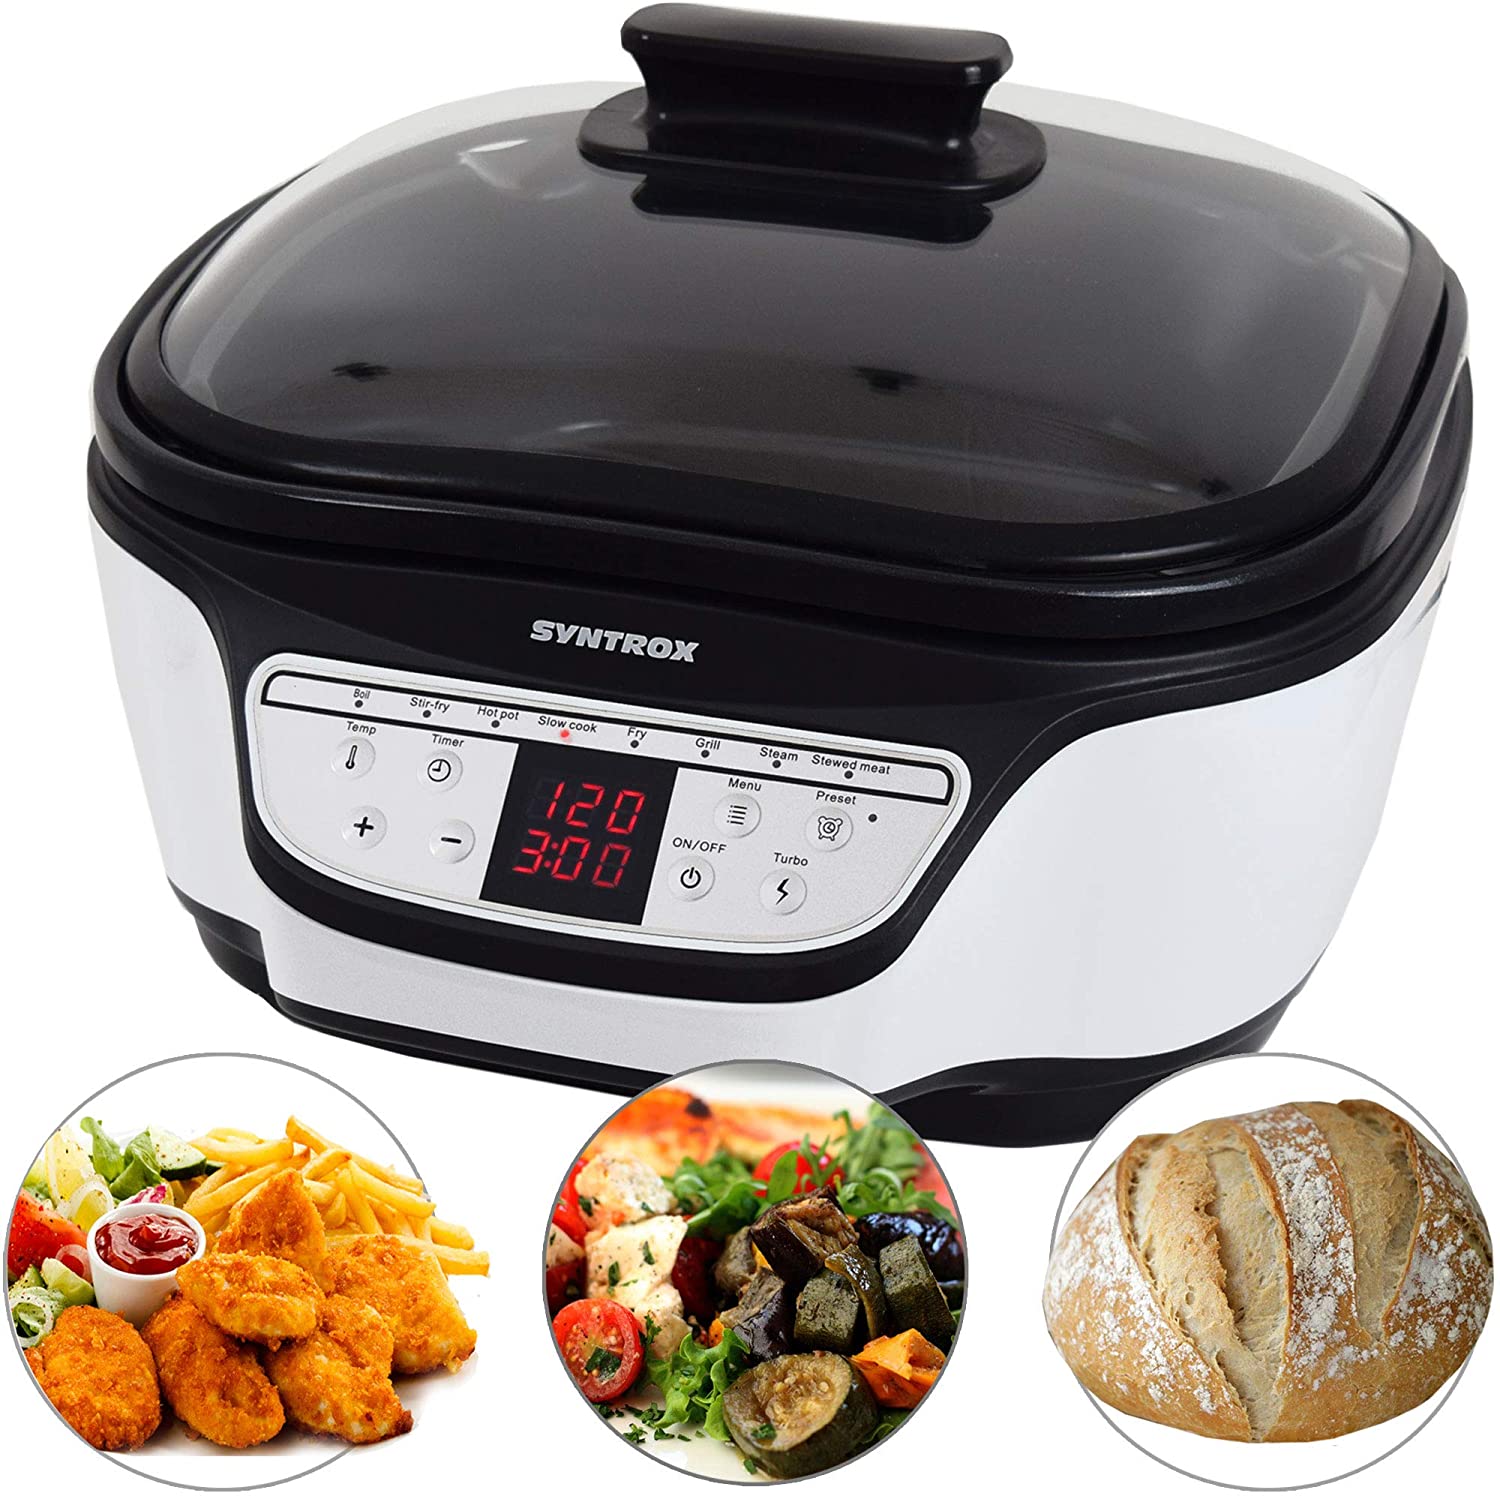 Syntrox Germany Programmable Multicooker 8-in-1 with Digital Panel MC-1500W Variety